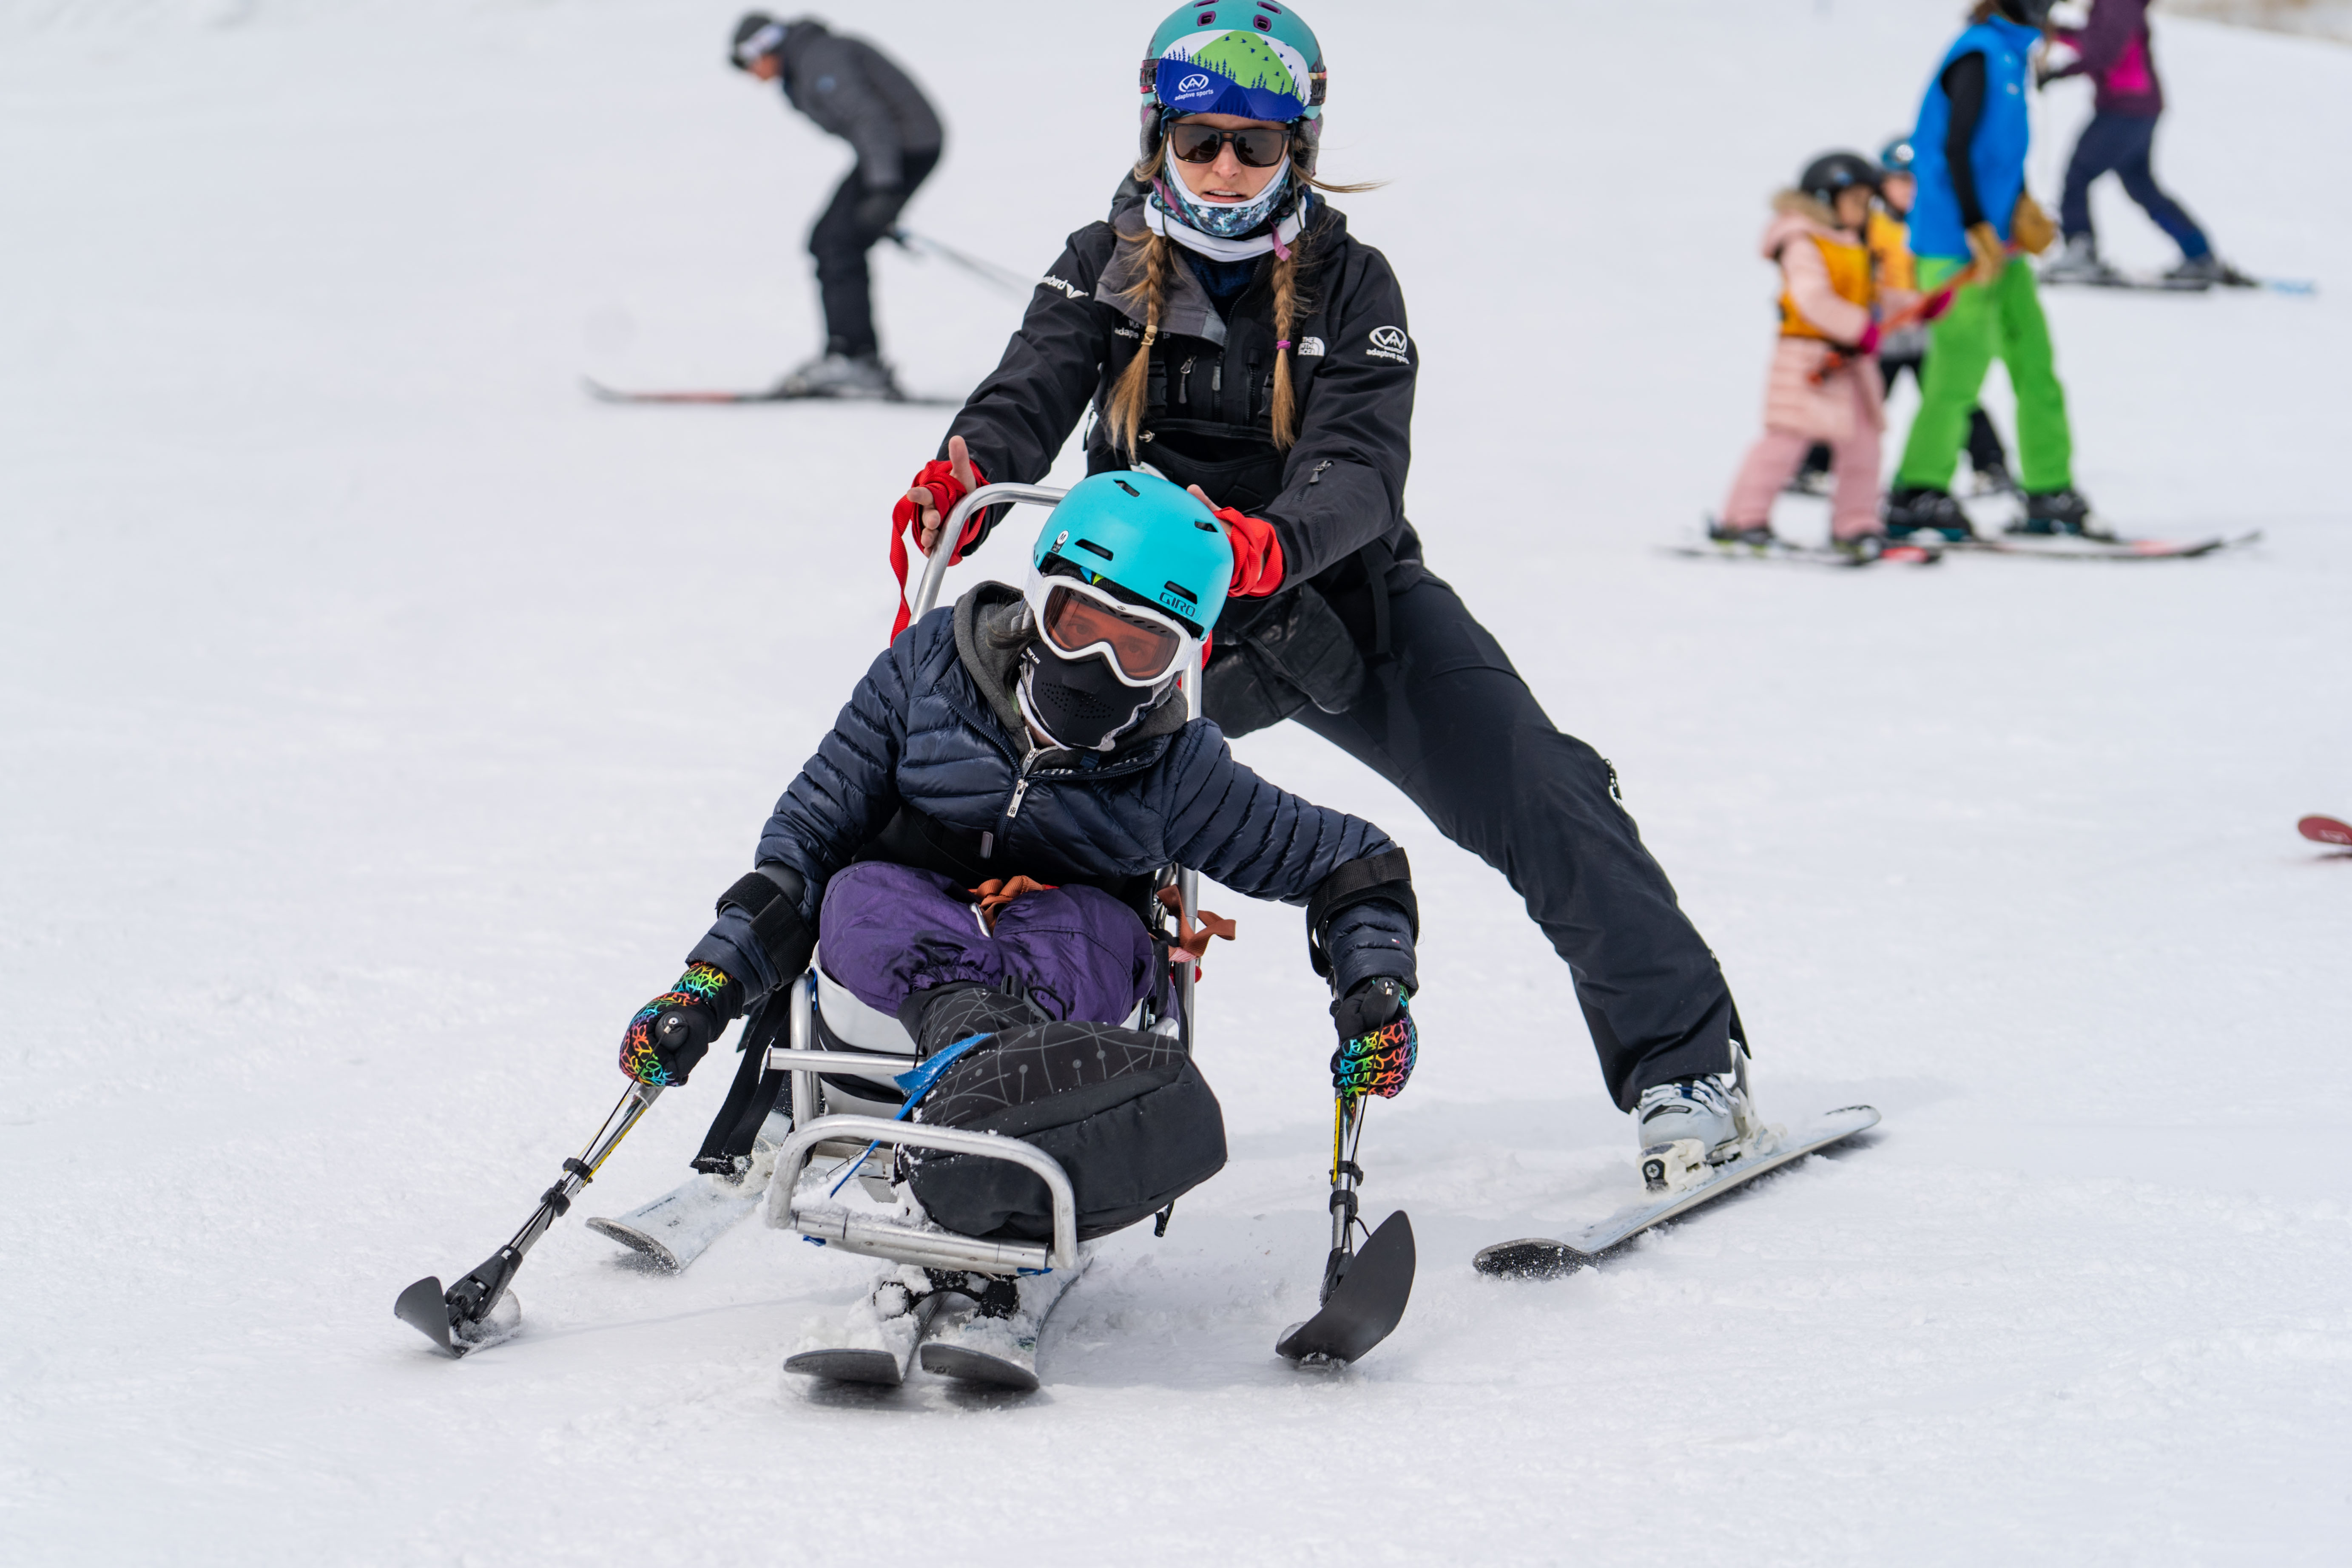 Wasatch Adaptive team member with a sit down skier at Snowbird